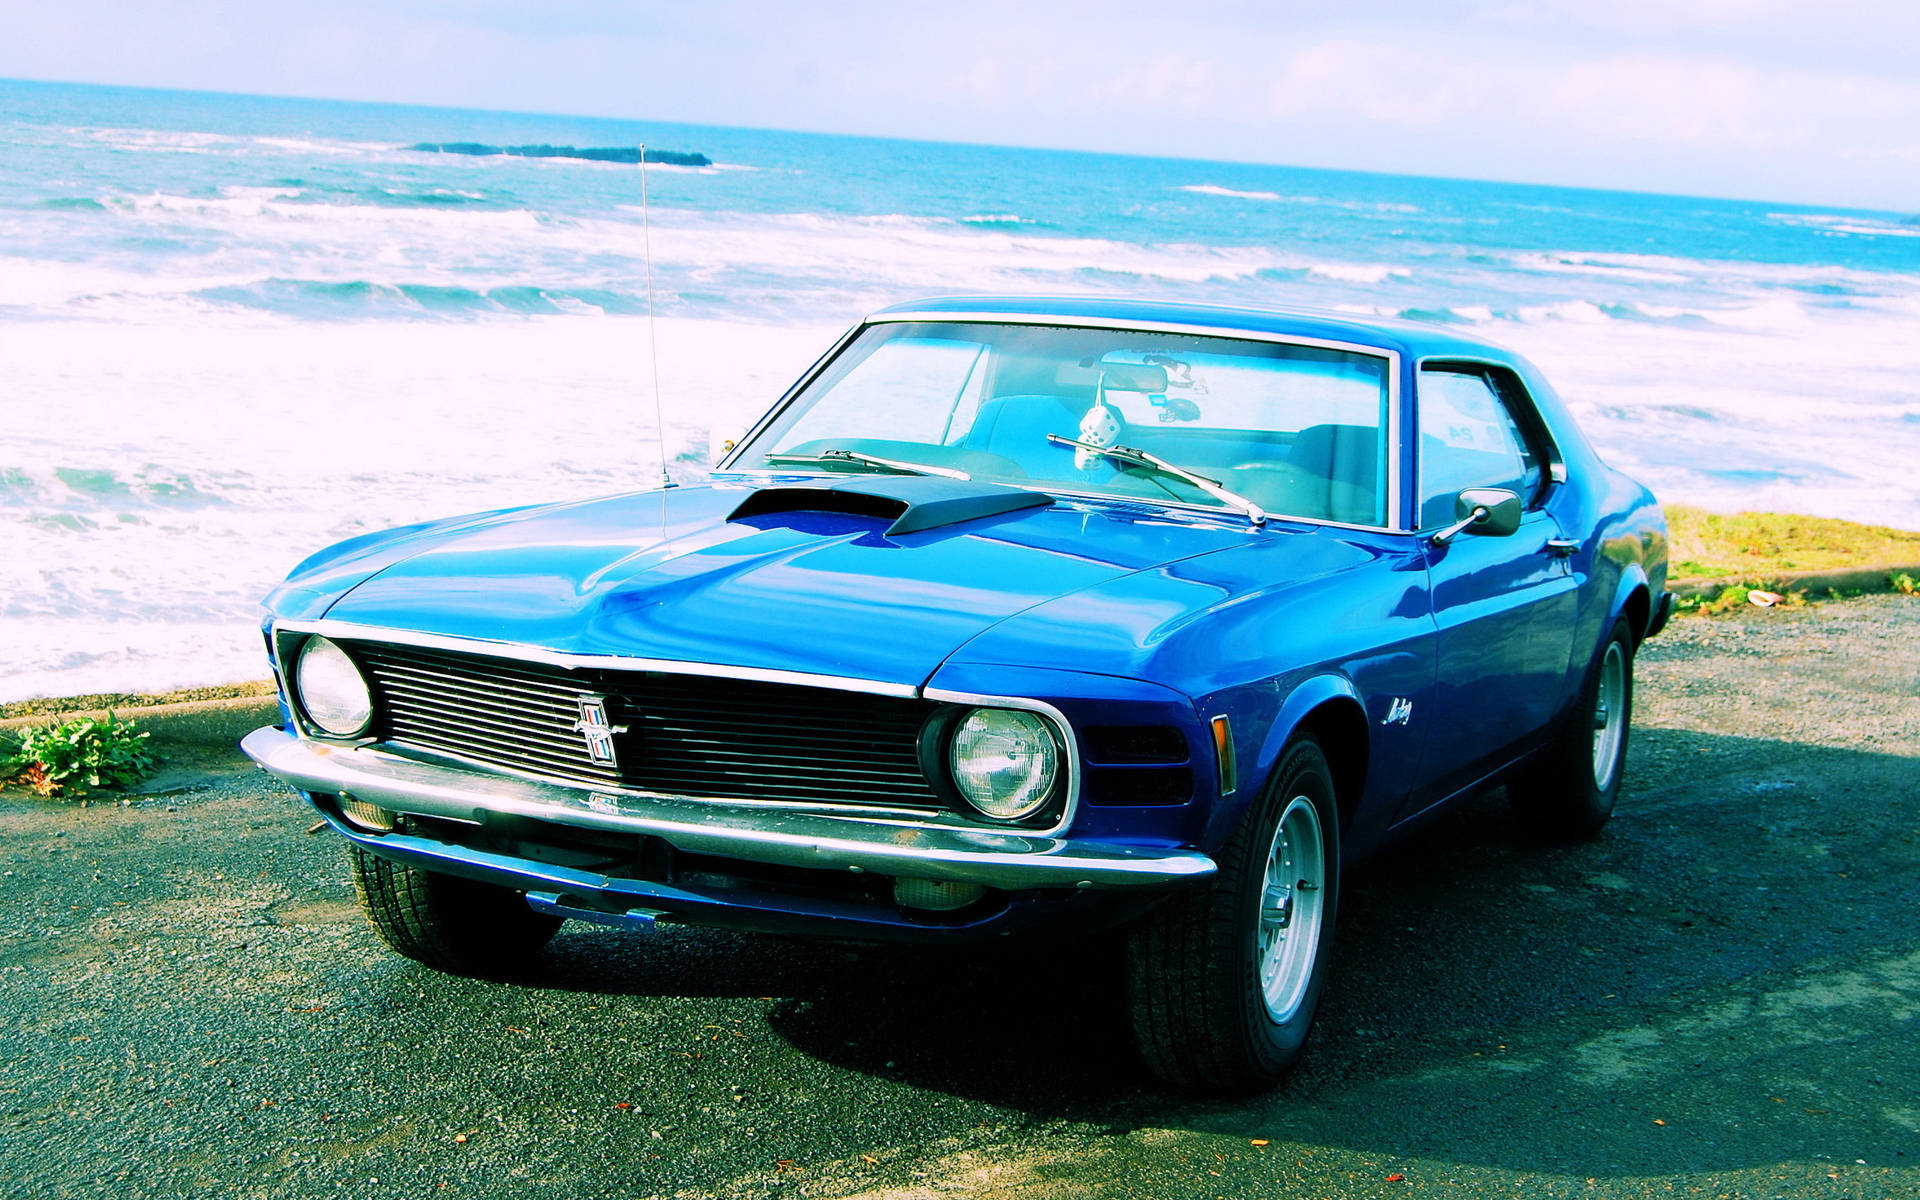 Vintage Mustang Hd On Beach Background